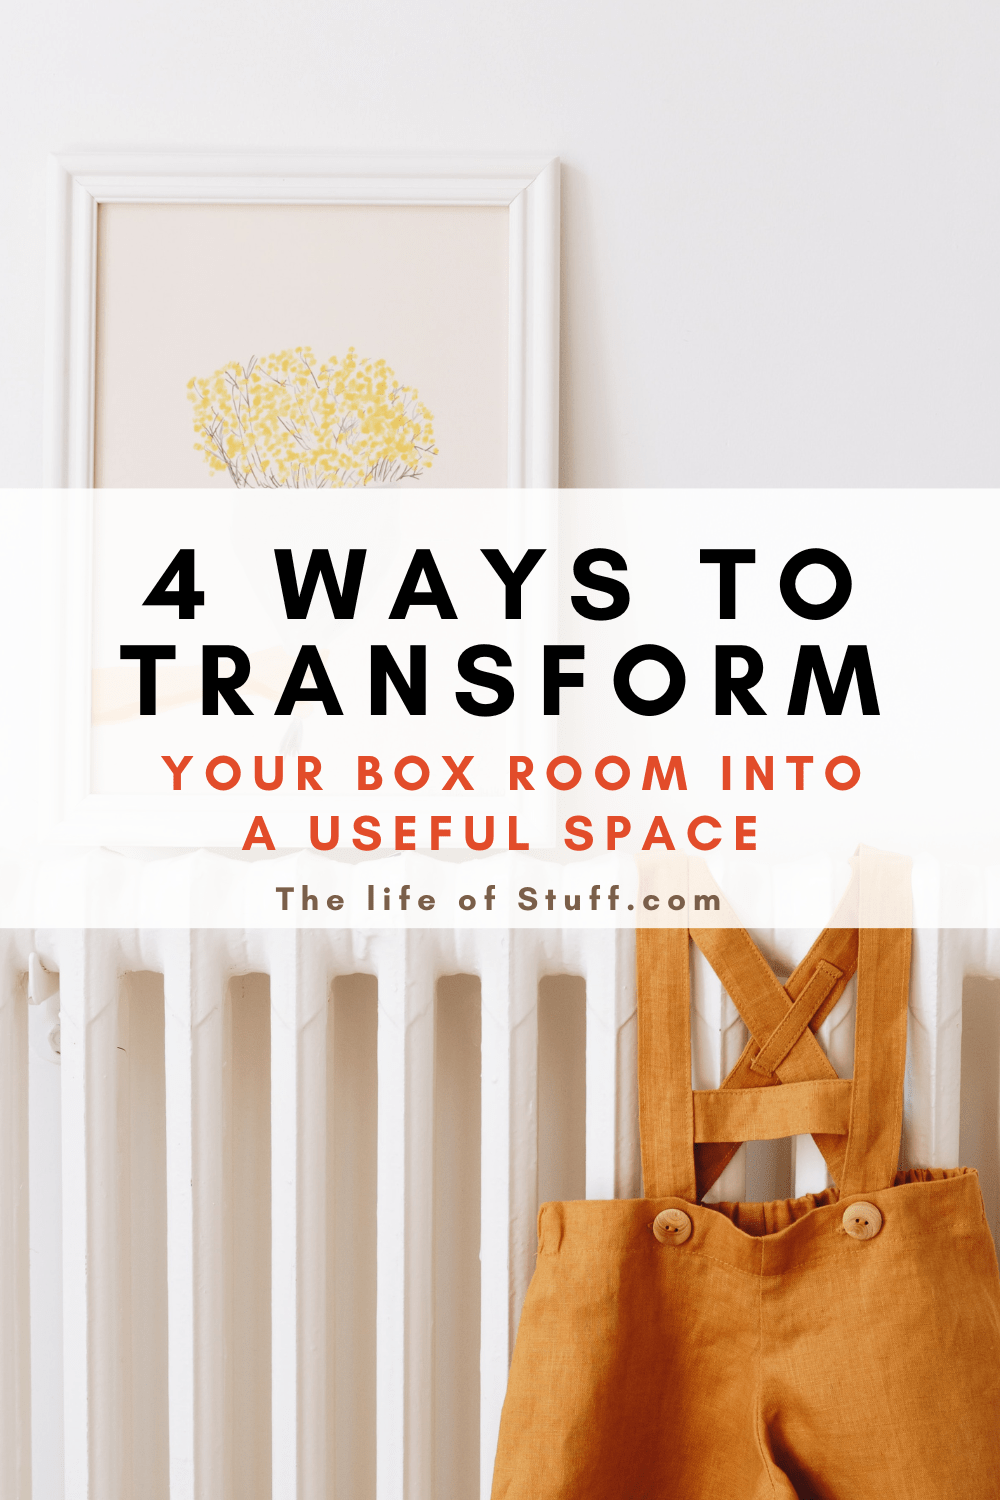 4 Ways to Transform Your Box Room into a Useful Space with The Life of Stuff